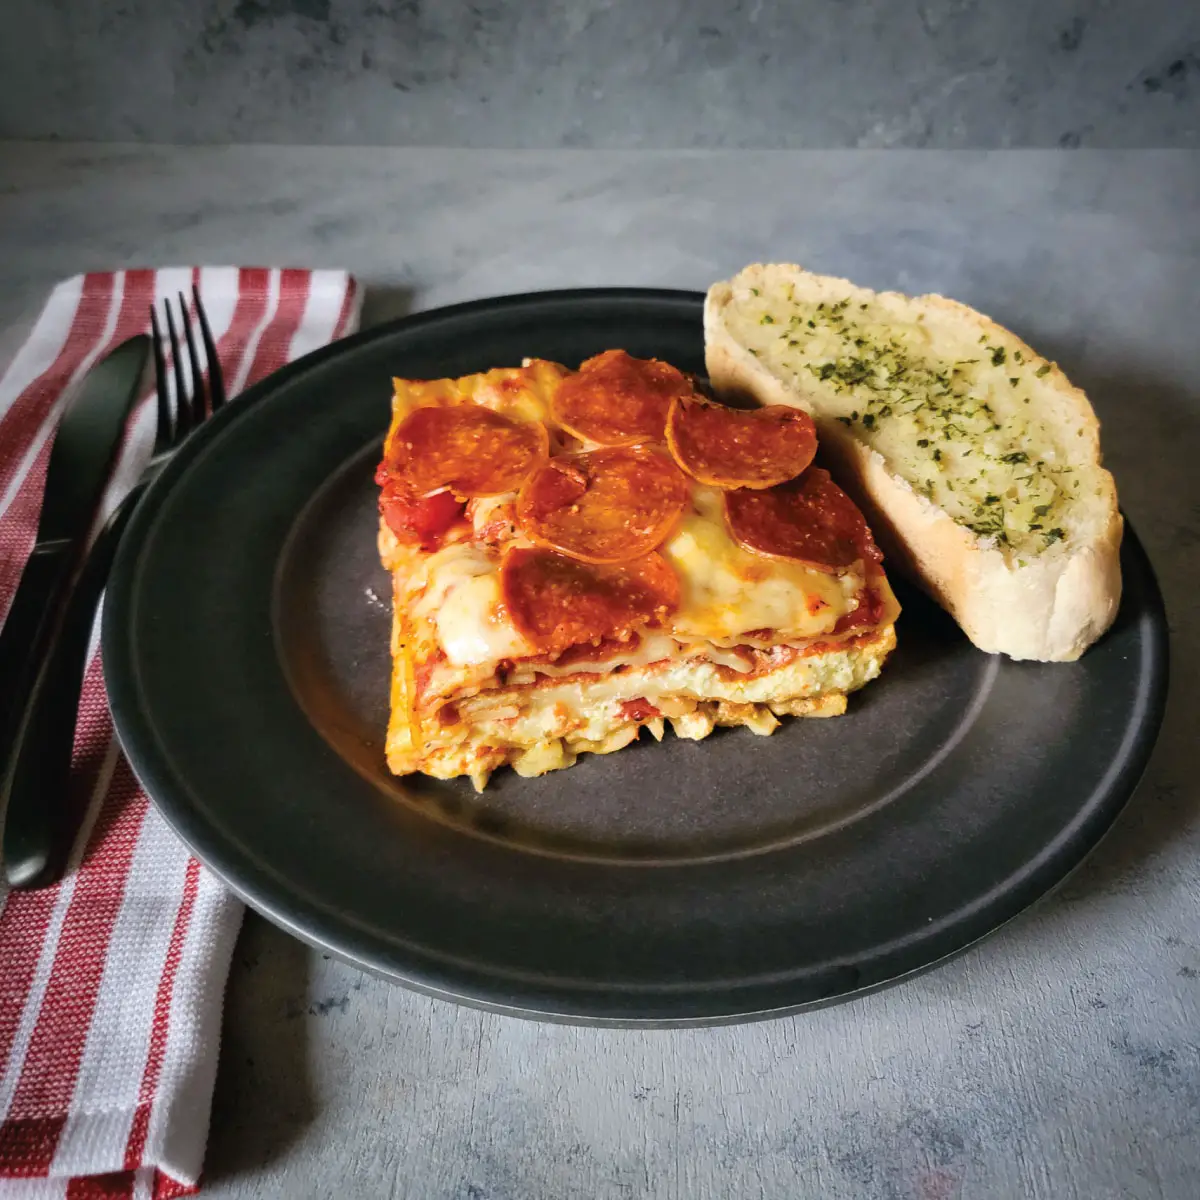 Piece of pizza lasagna on a dinner plate with a slice of garlic bread.